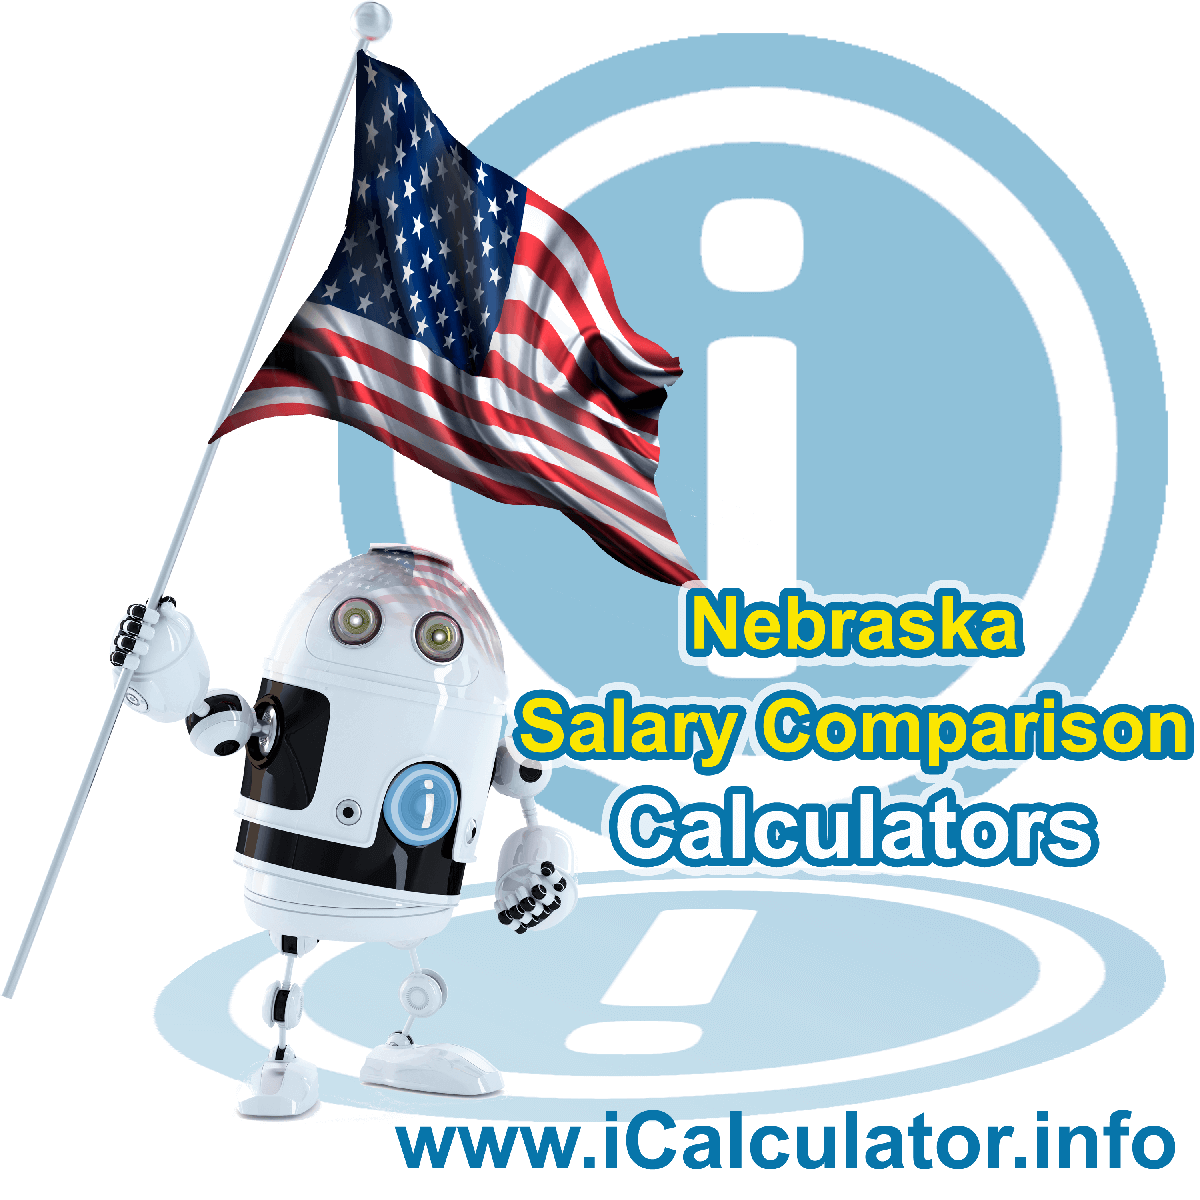 Nebraska Salary Comparison Calculator 2023 | iCalculator™ | The Nebraska Salary Comparison Calculator allows you to quickly calculate and compare upto 6 salaries in Nebraska or compare with other states for the 2023 tax year and historical tax years. 